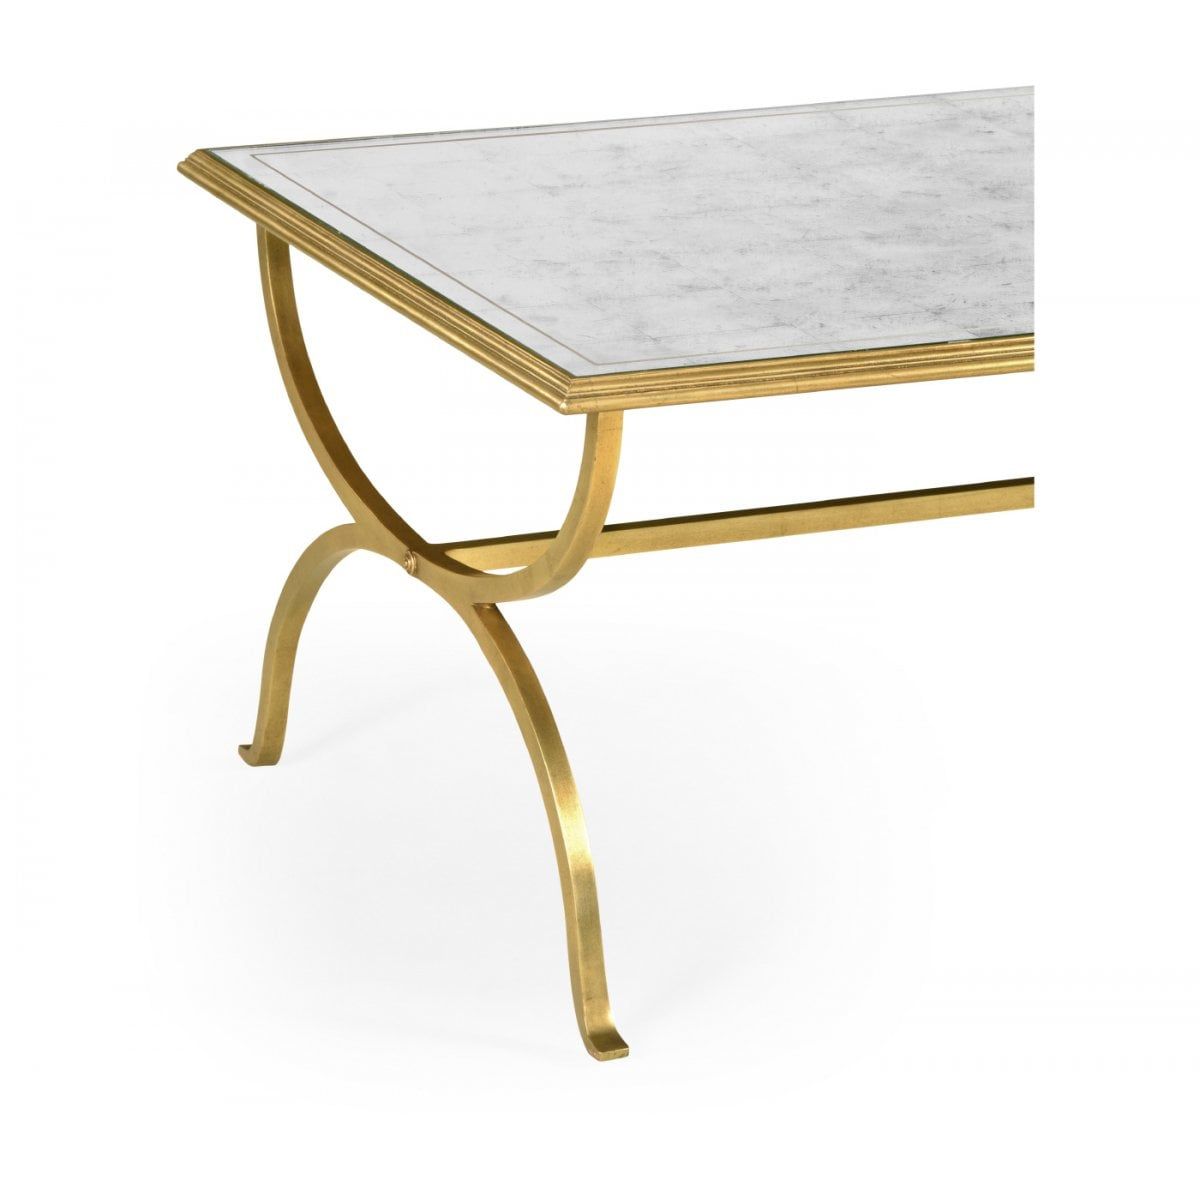 Rectangular Gold Coffee Table With Glass Top | Swanky Throughout Rectangular Glass Top Coffee Tables (View 2 of 15)